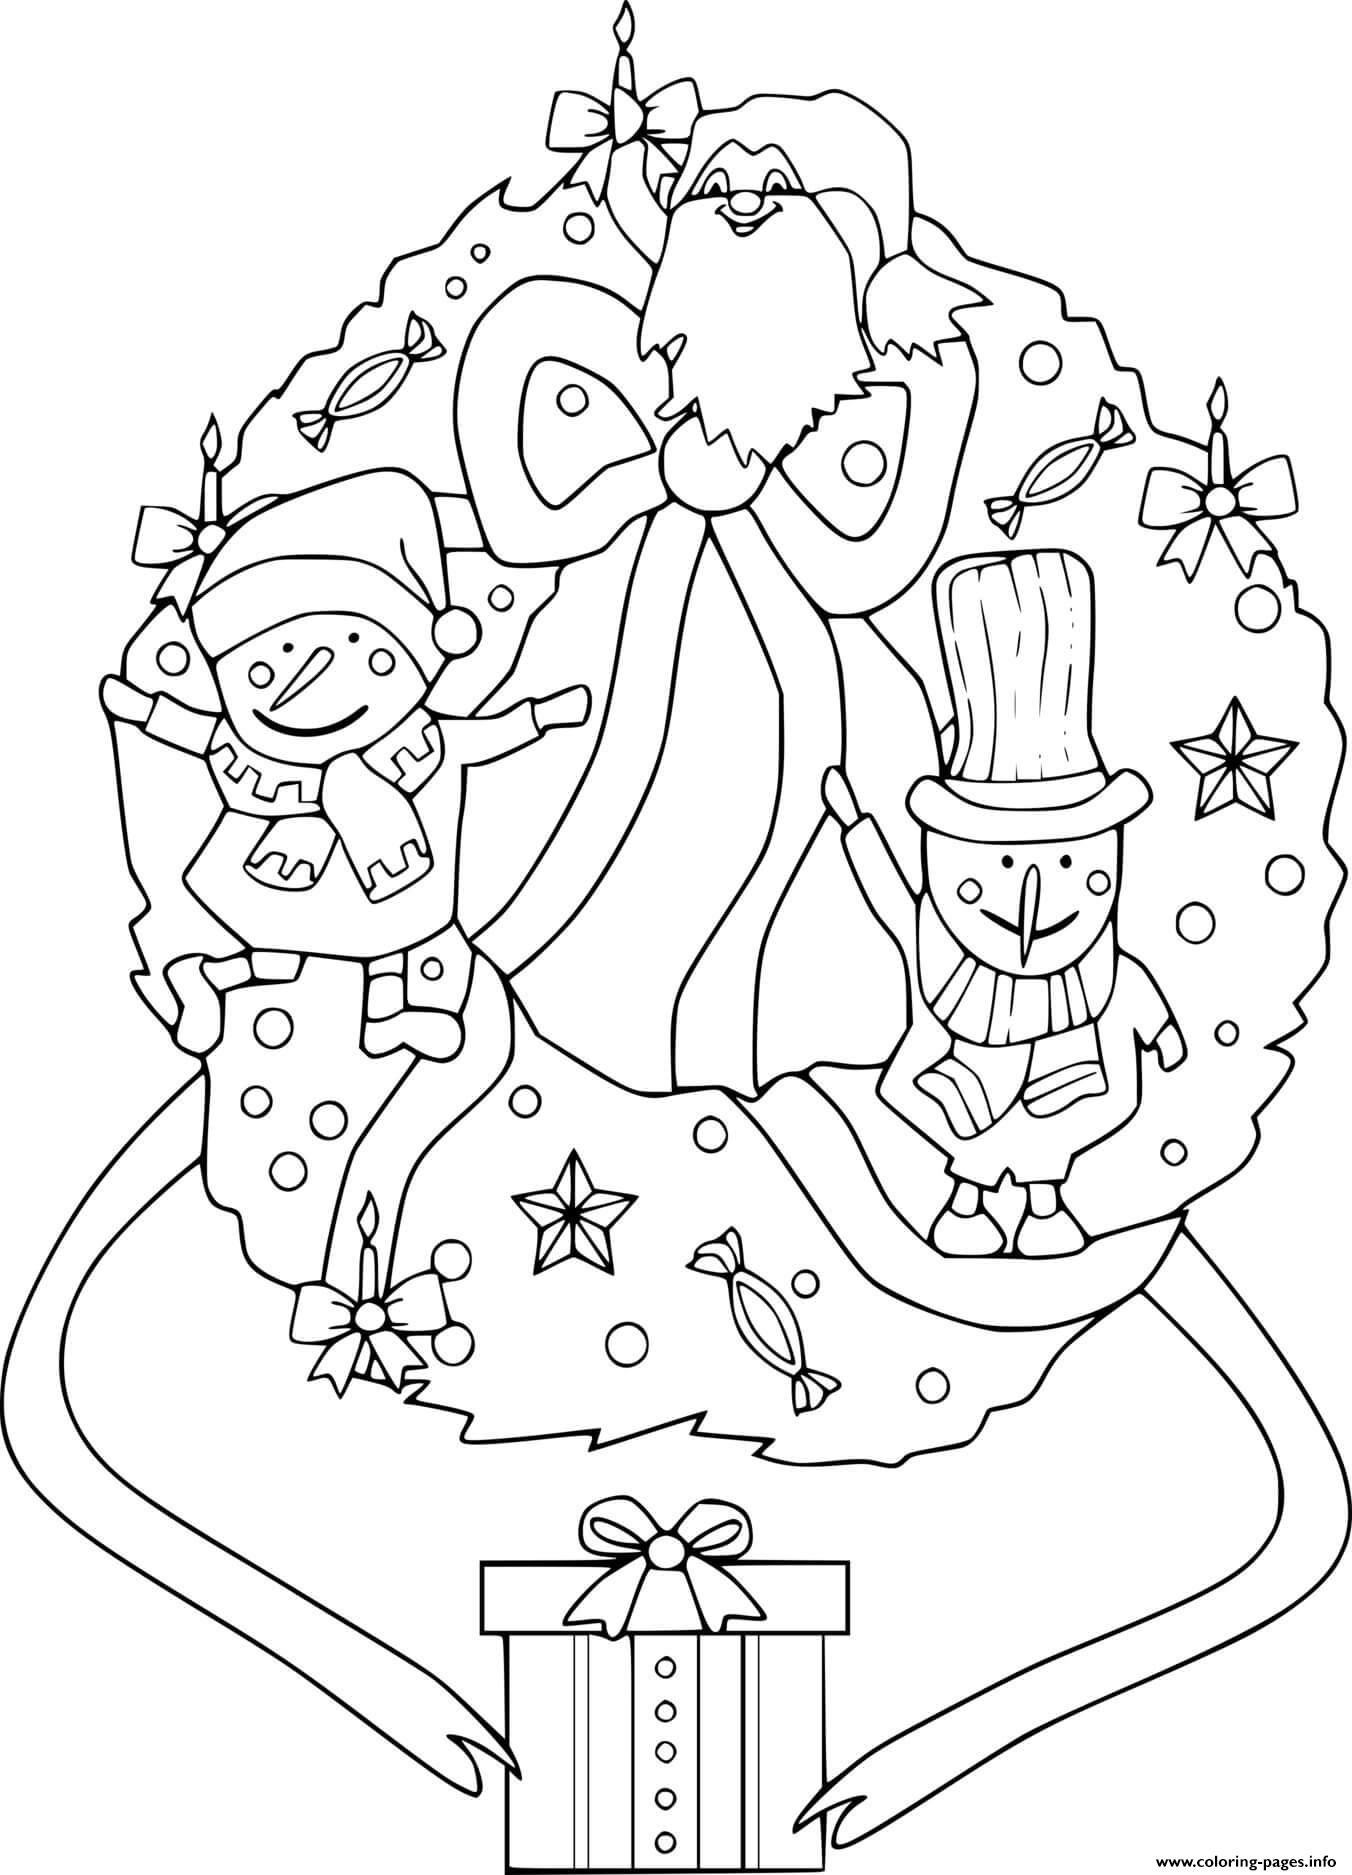 Christmas Wreath With Snowmen coloring